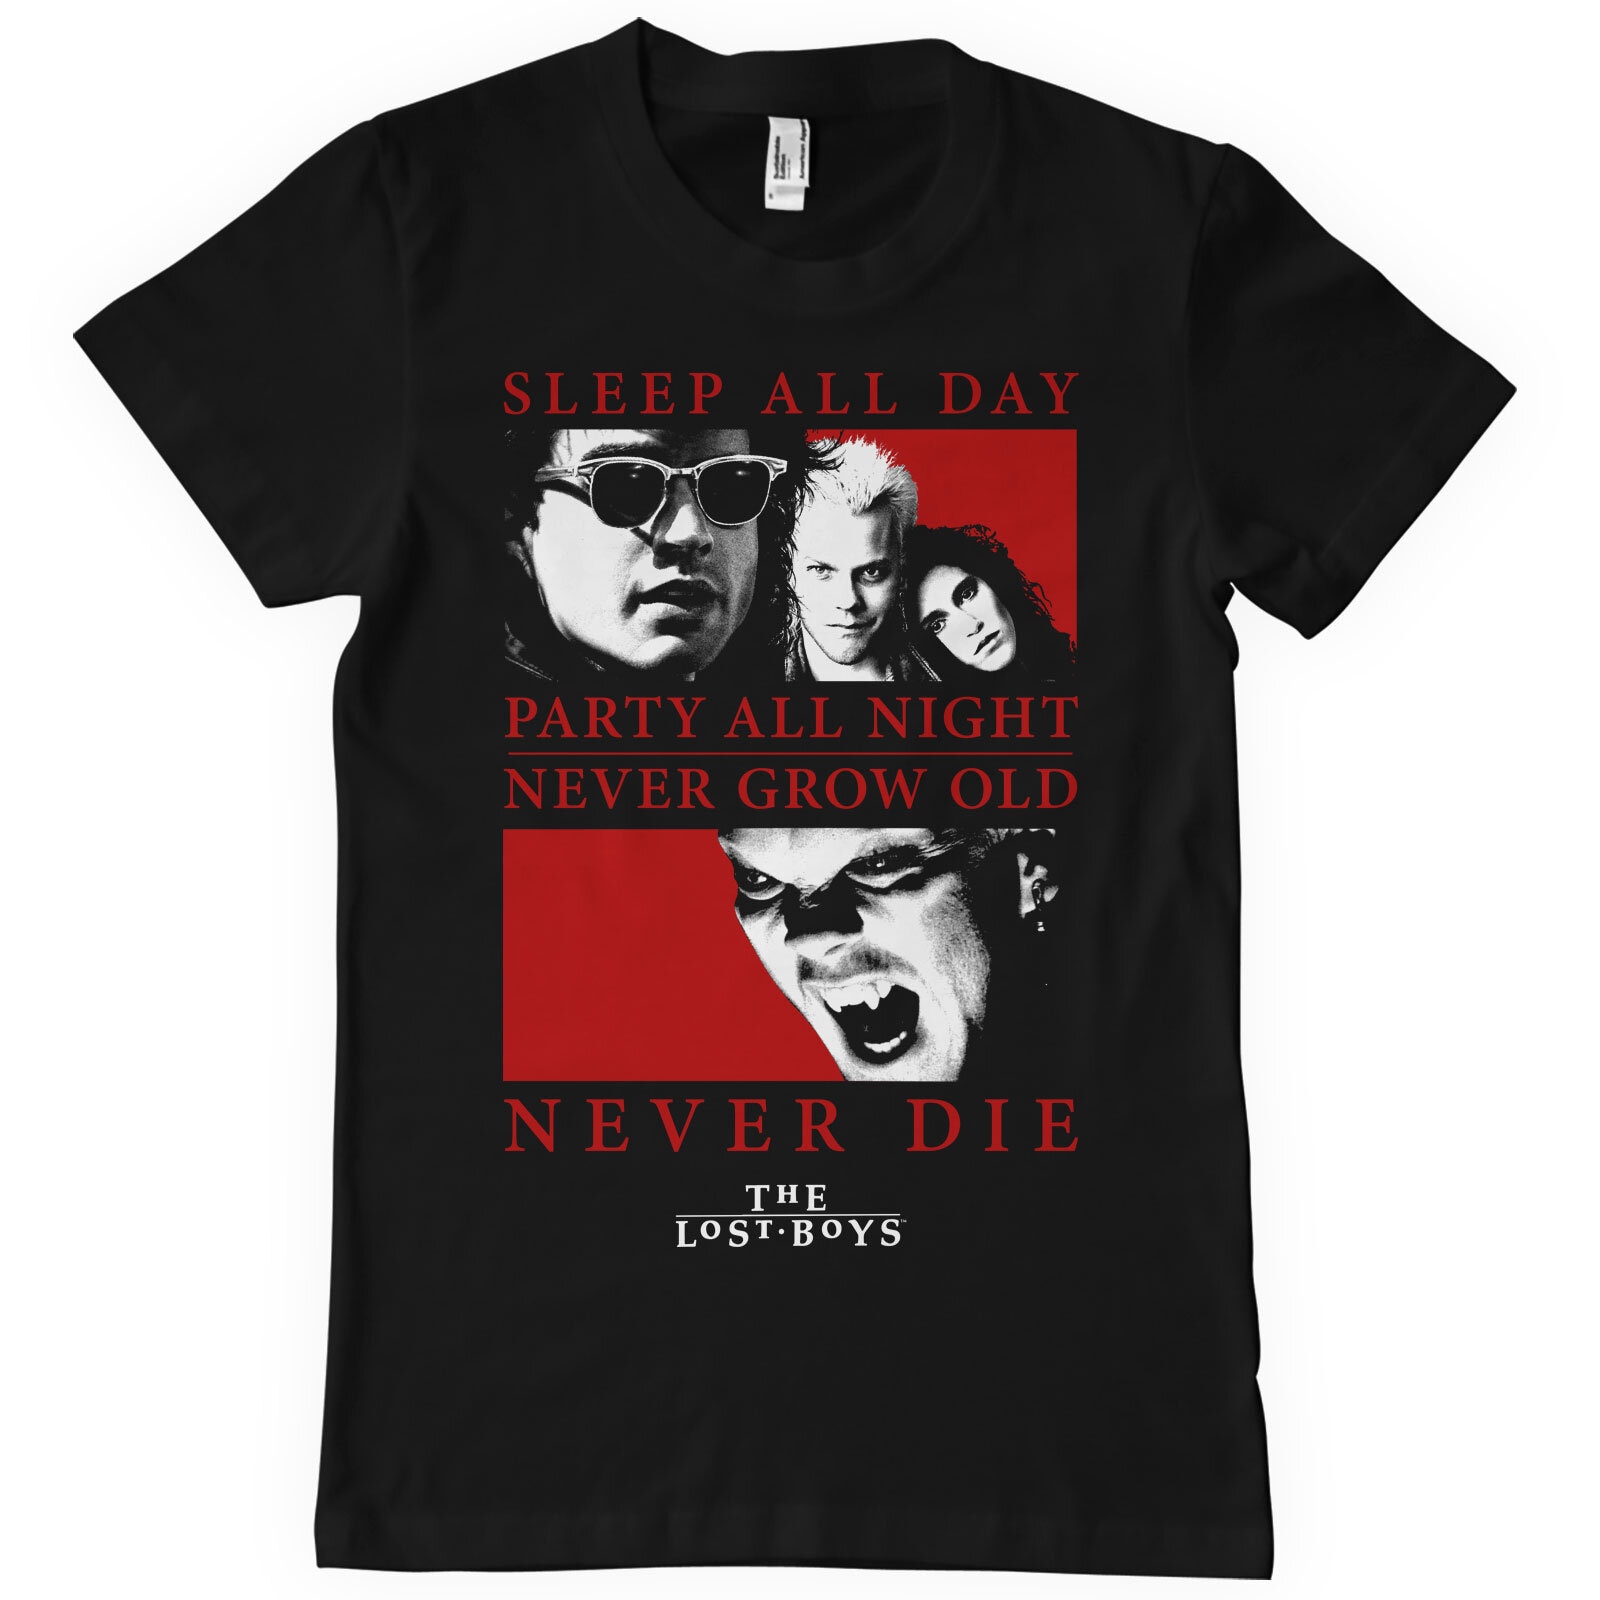 Sleep All Day - Party All Night T-Shirt